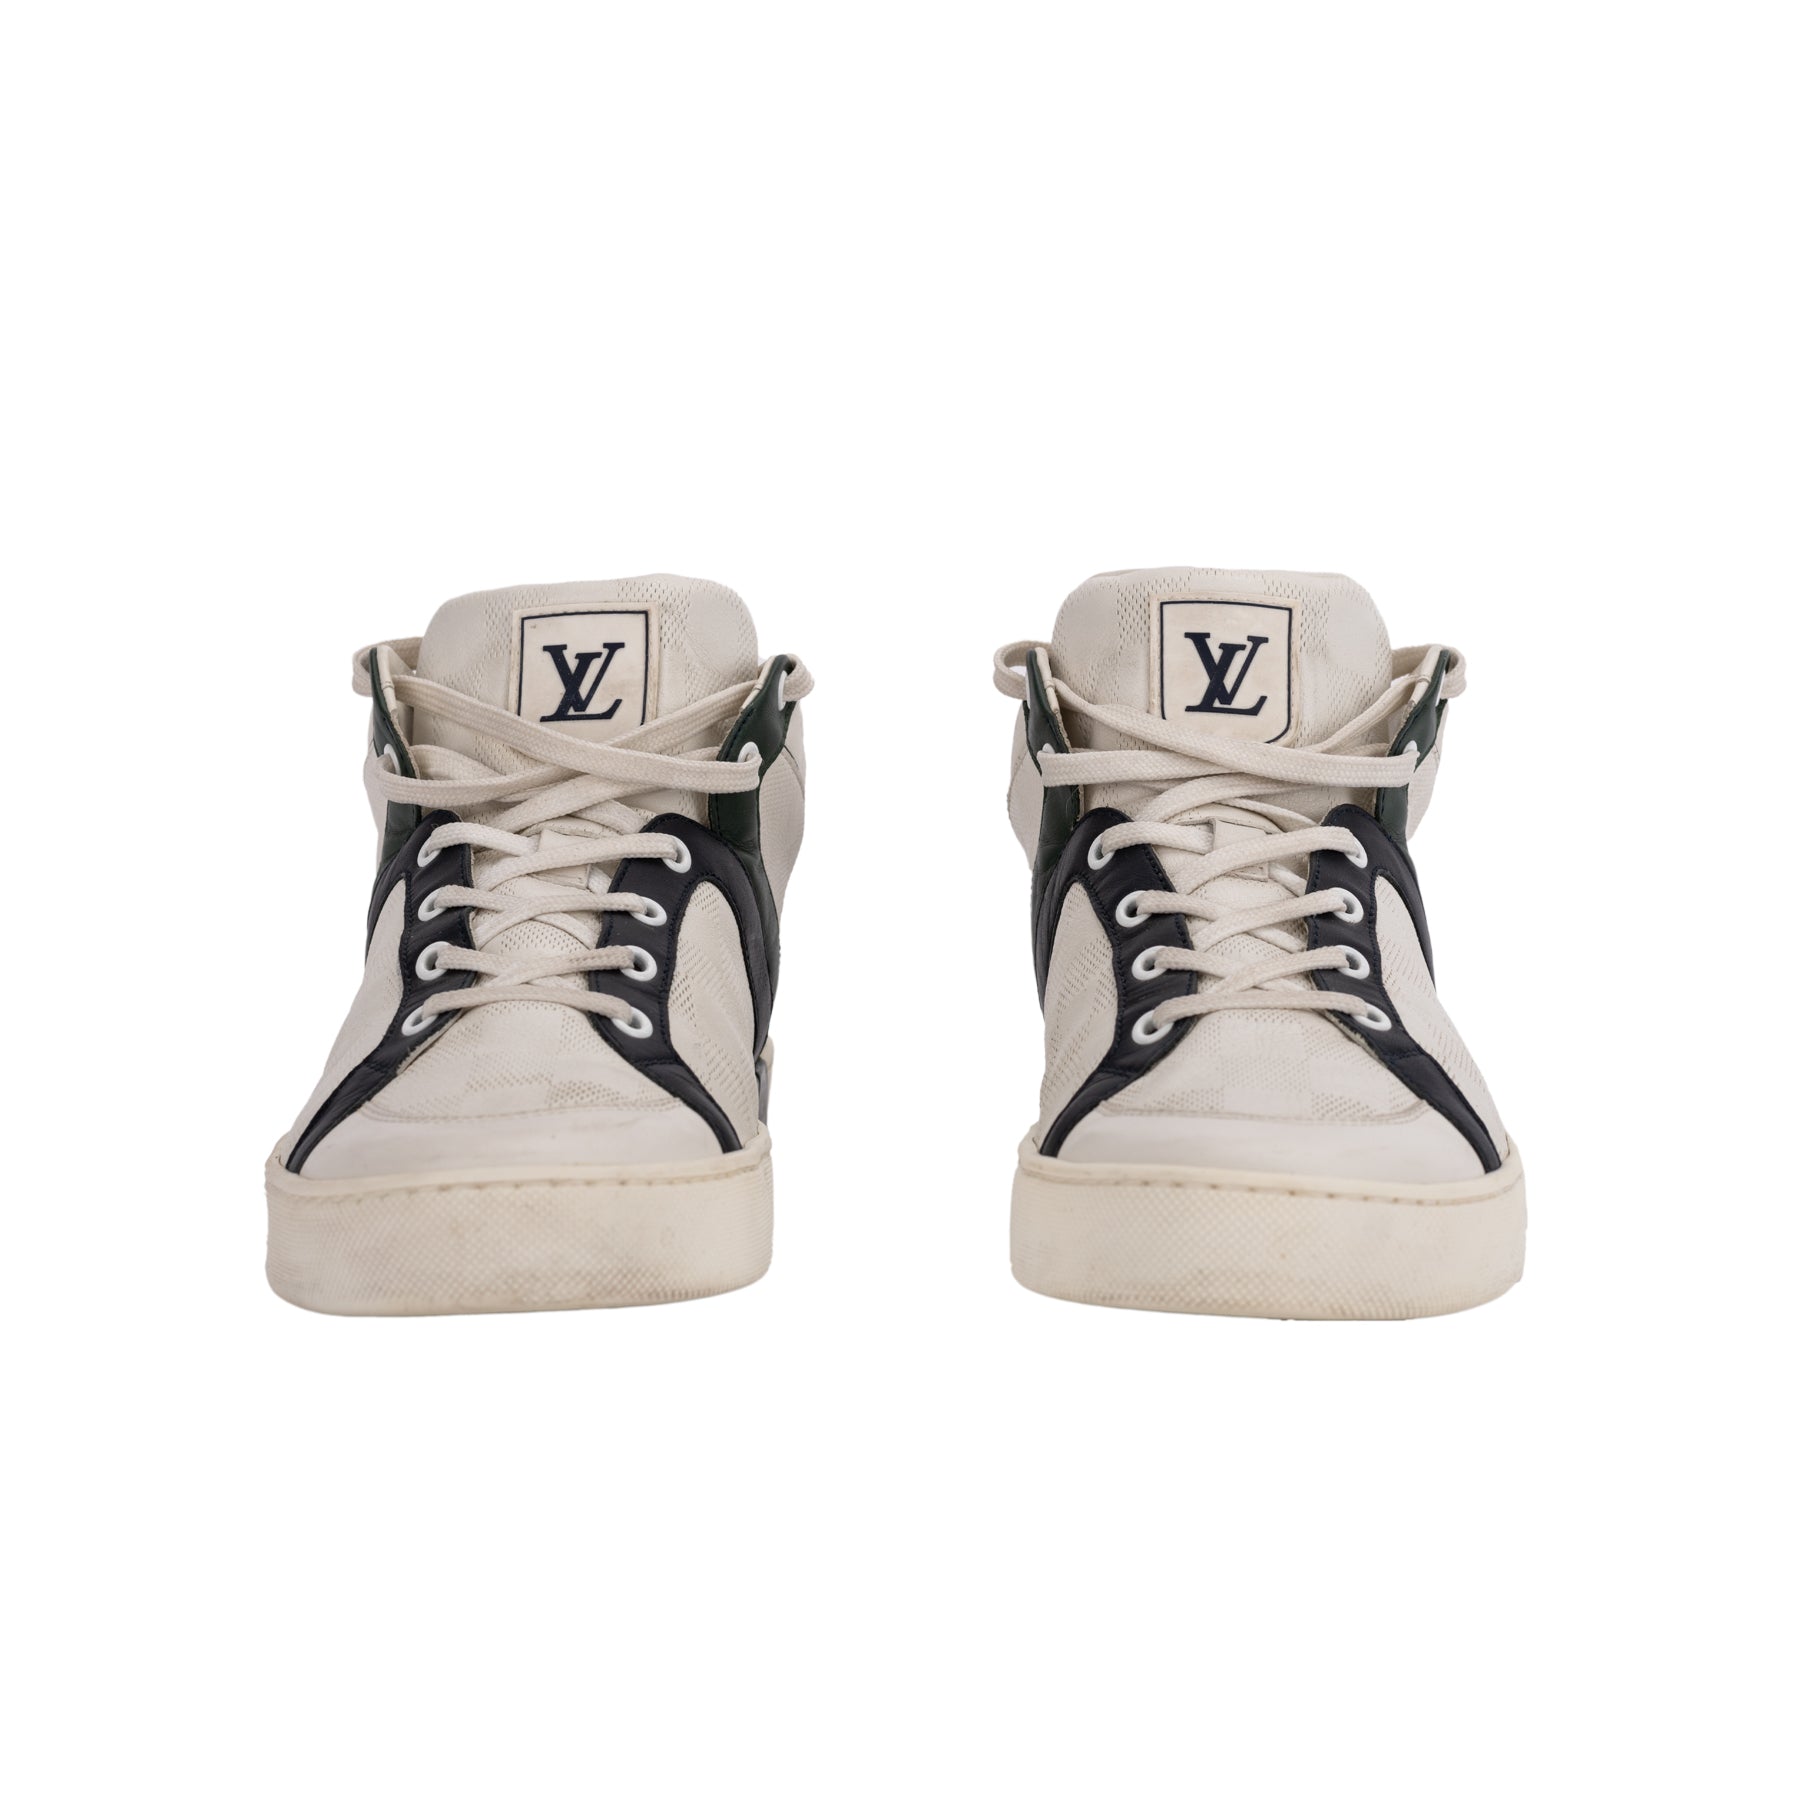 Louis Vuitton White Leather And Suede Low Top Sneakers Size 44.5